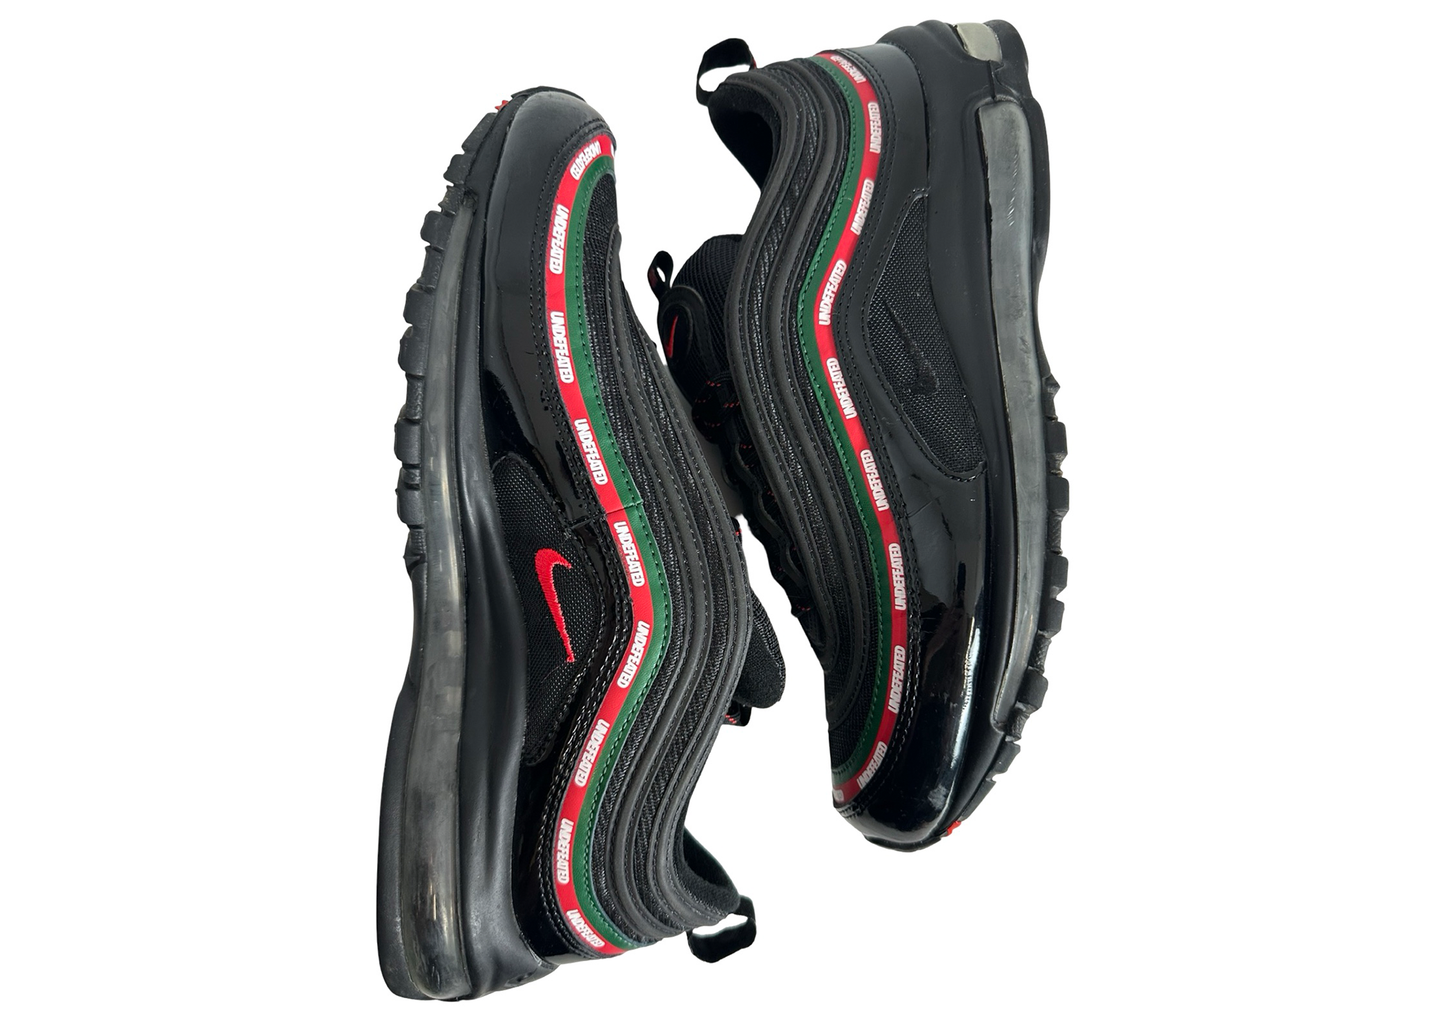 Nike Air Max 97 Undefeated Black